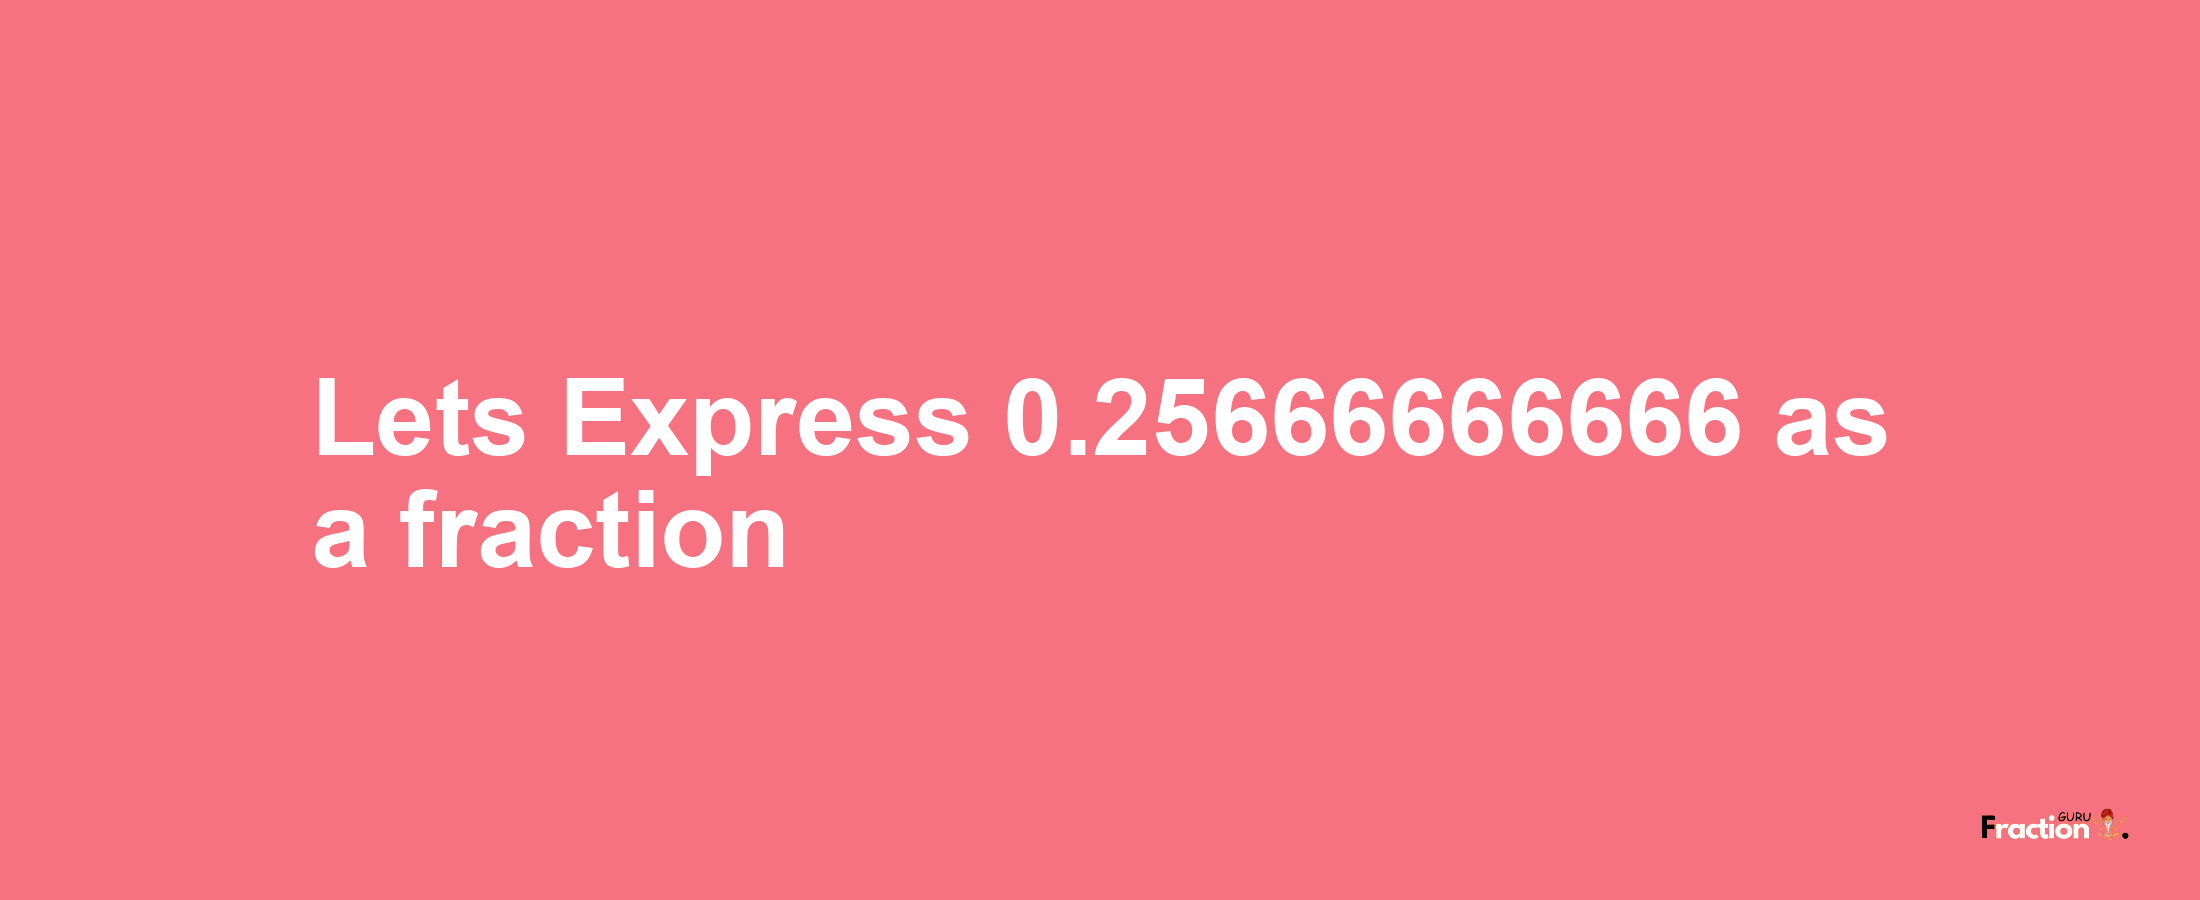 Lets Express 0.25666666666 as afraction